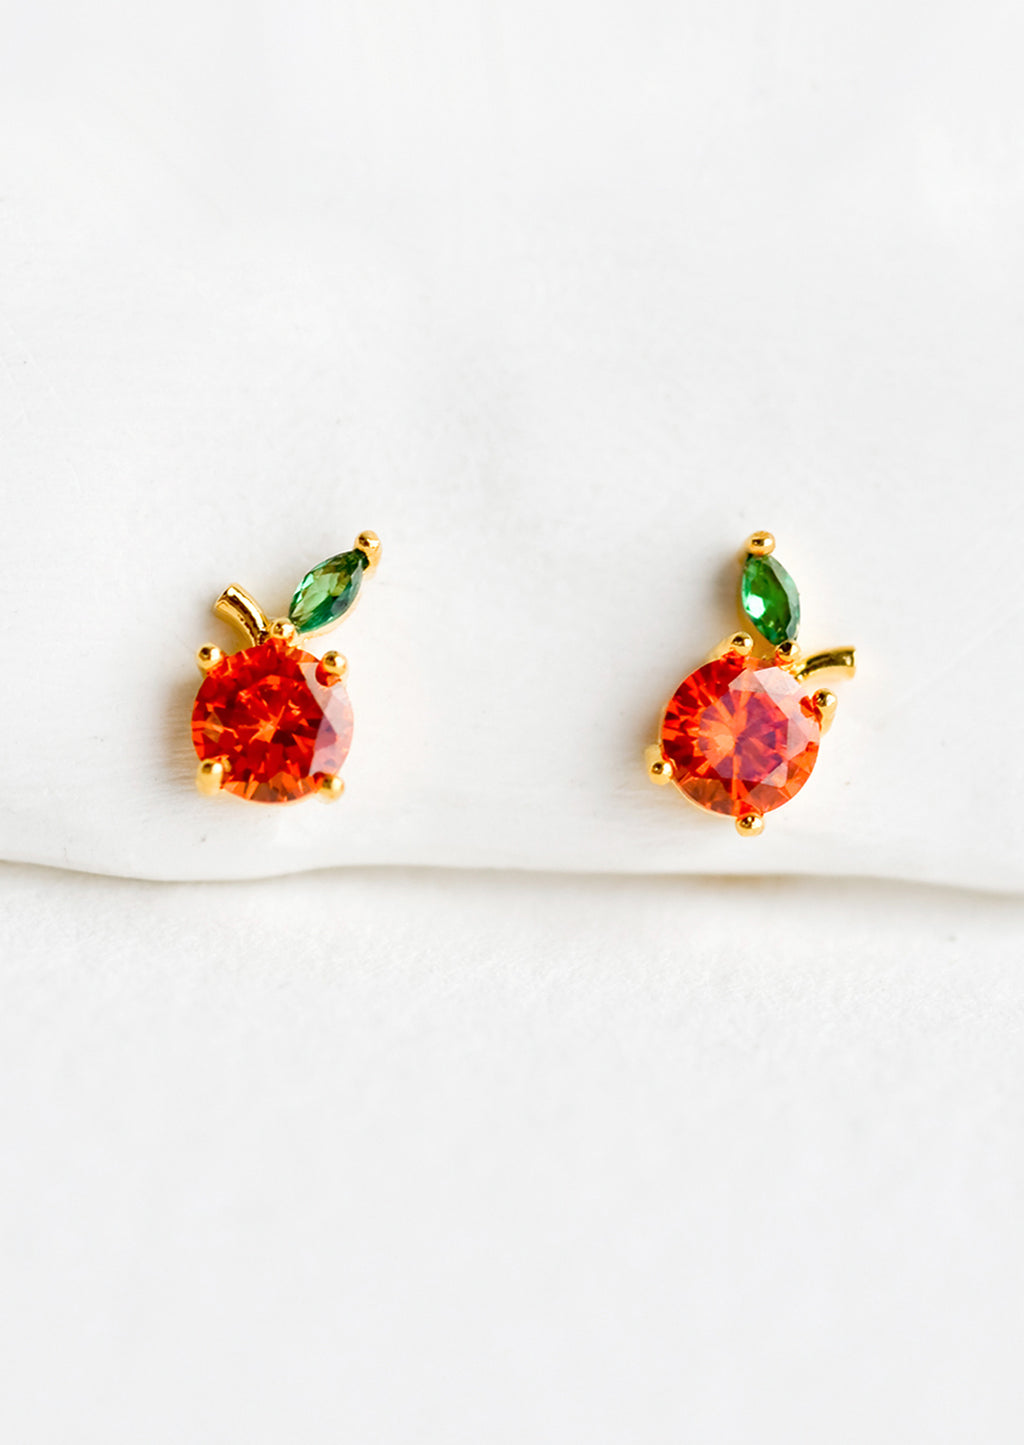 Orange: A pair of small crystal stud earrings in the shape of oranges.